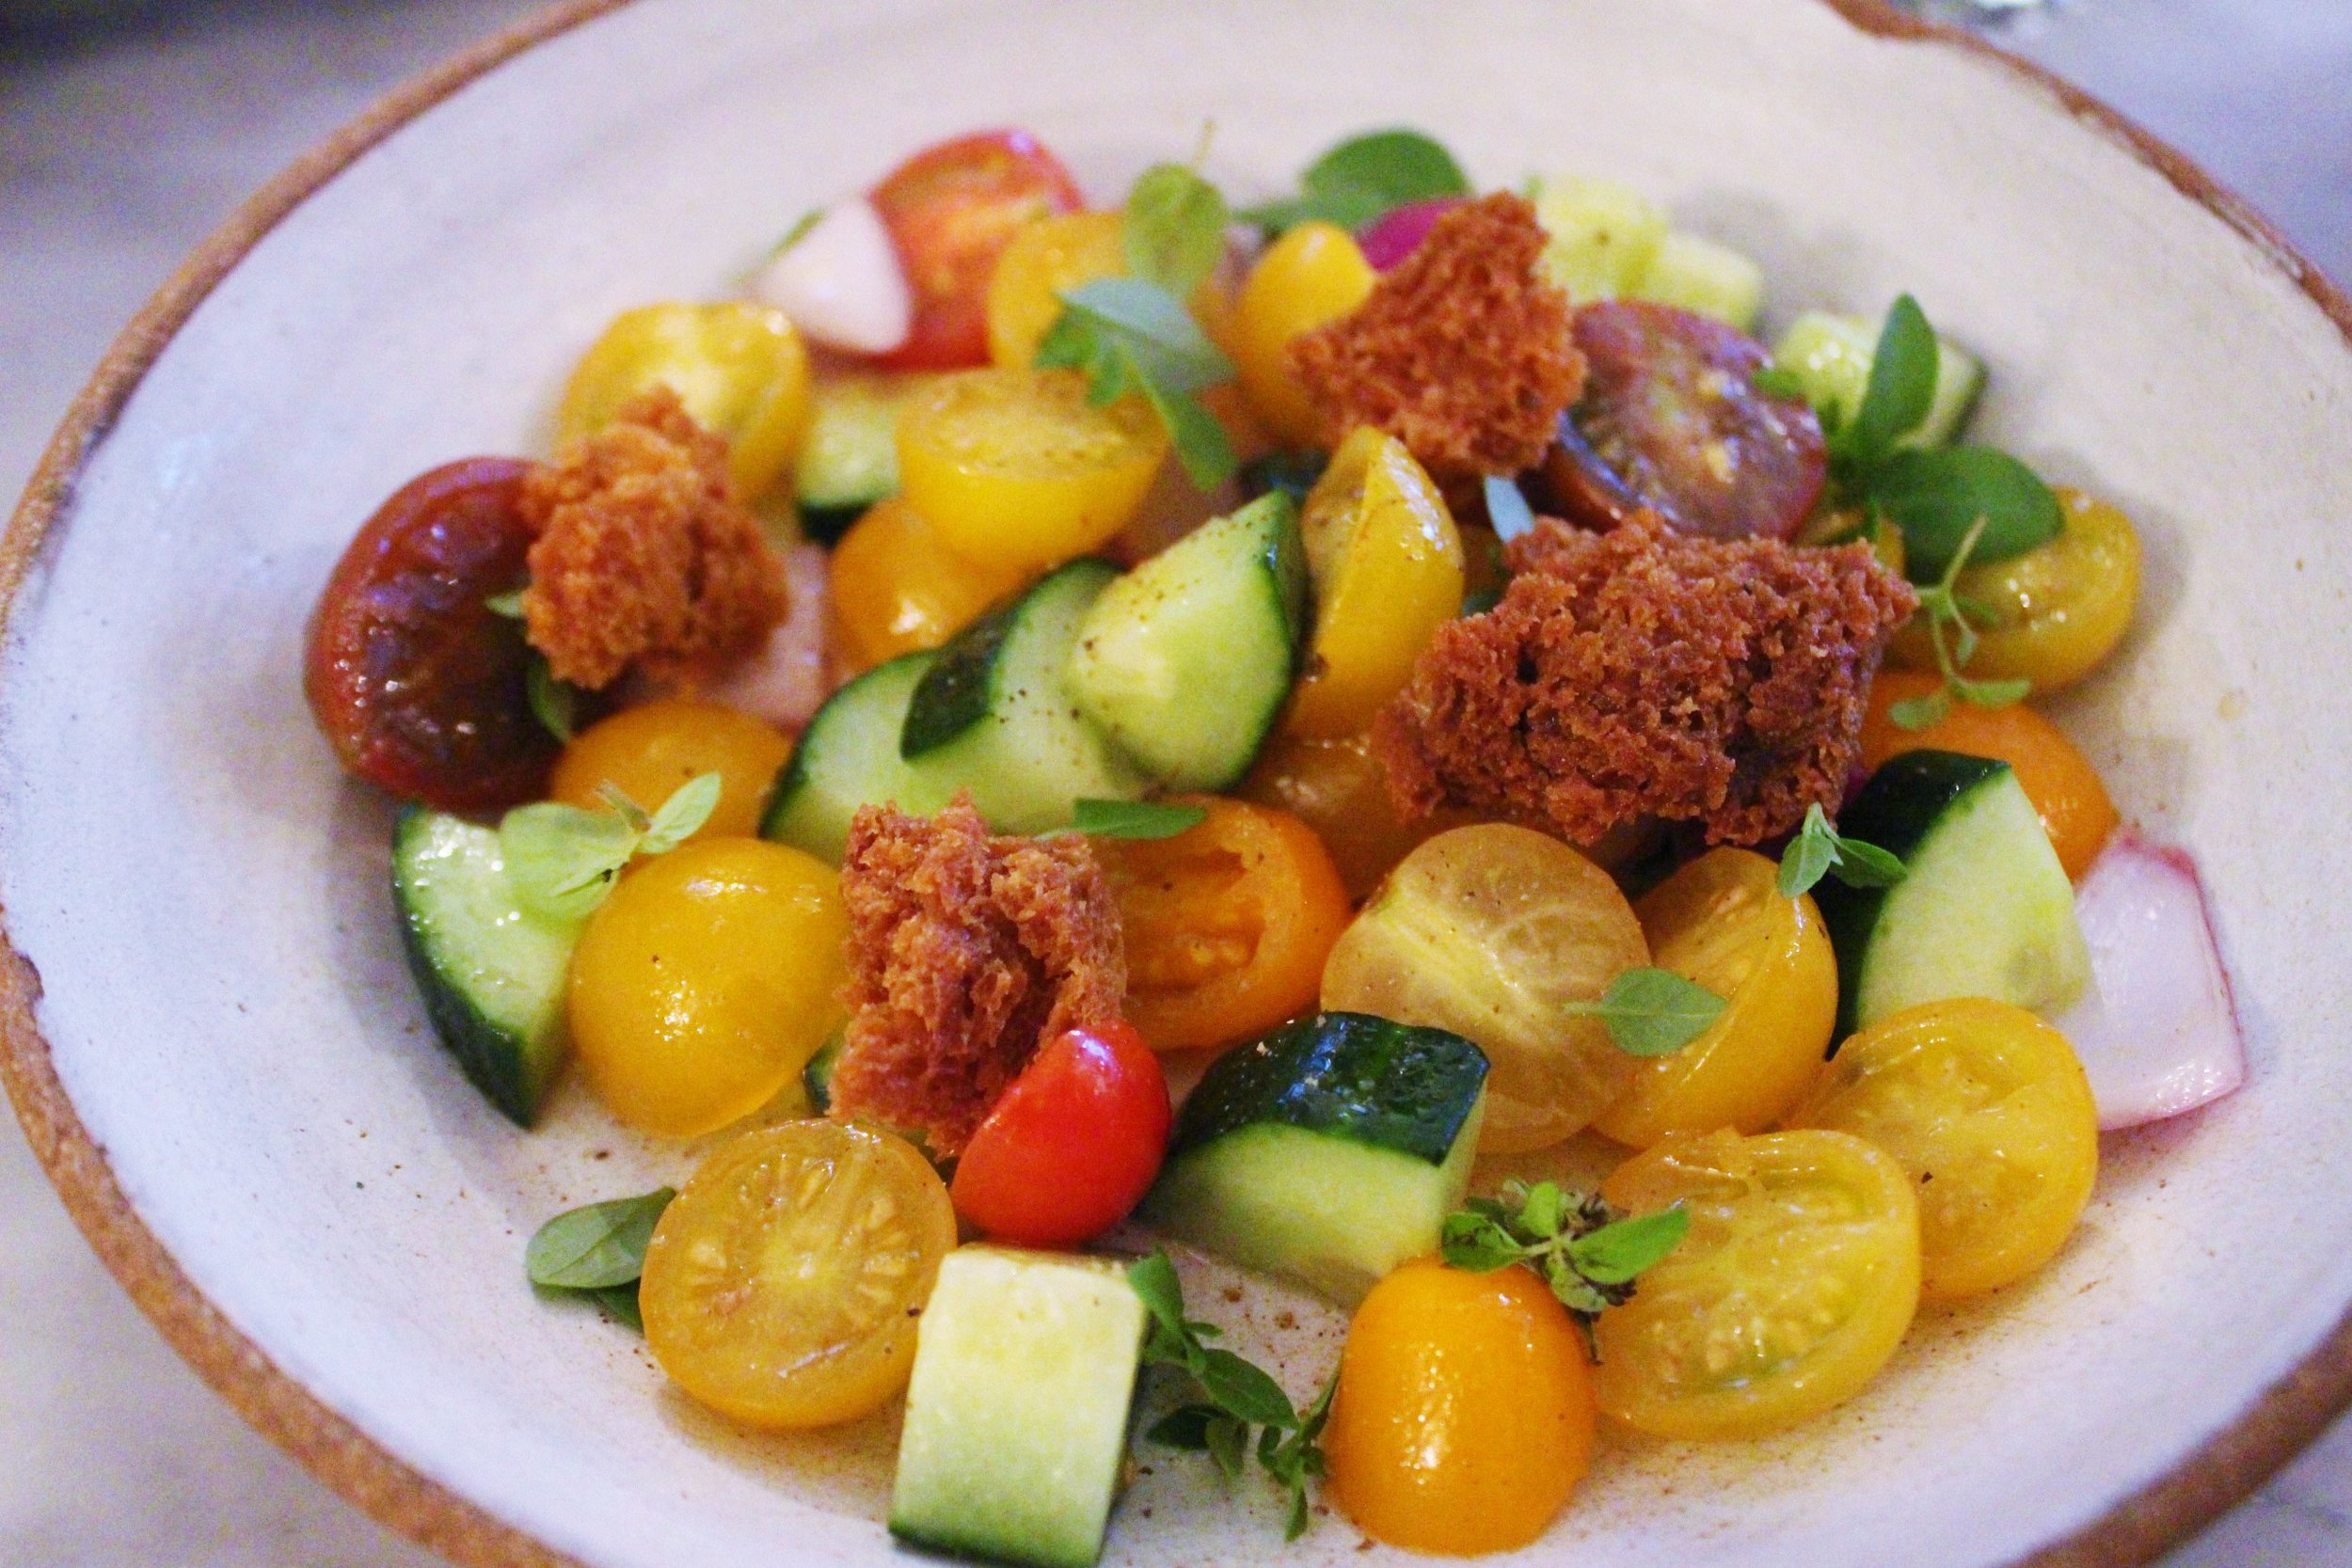 Salad of Cherry Tomatoes, Cucumbers, Fried Sourdough, and Red Onion